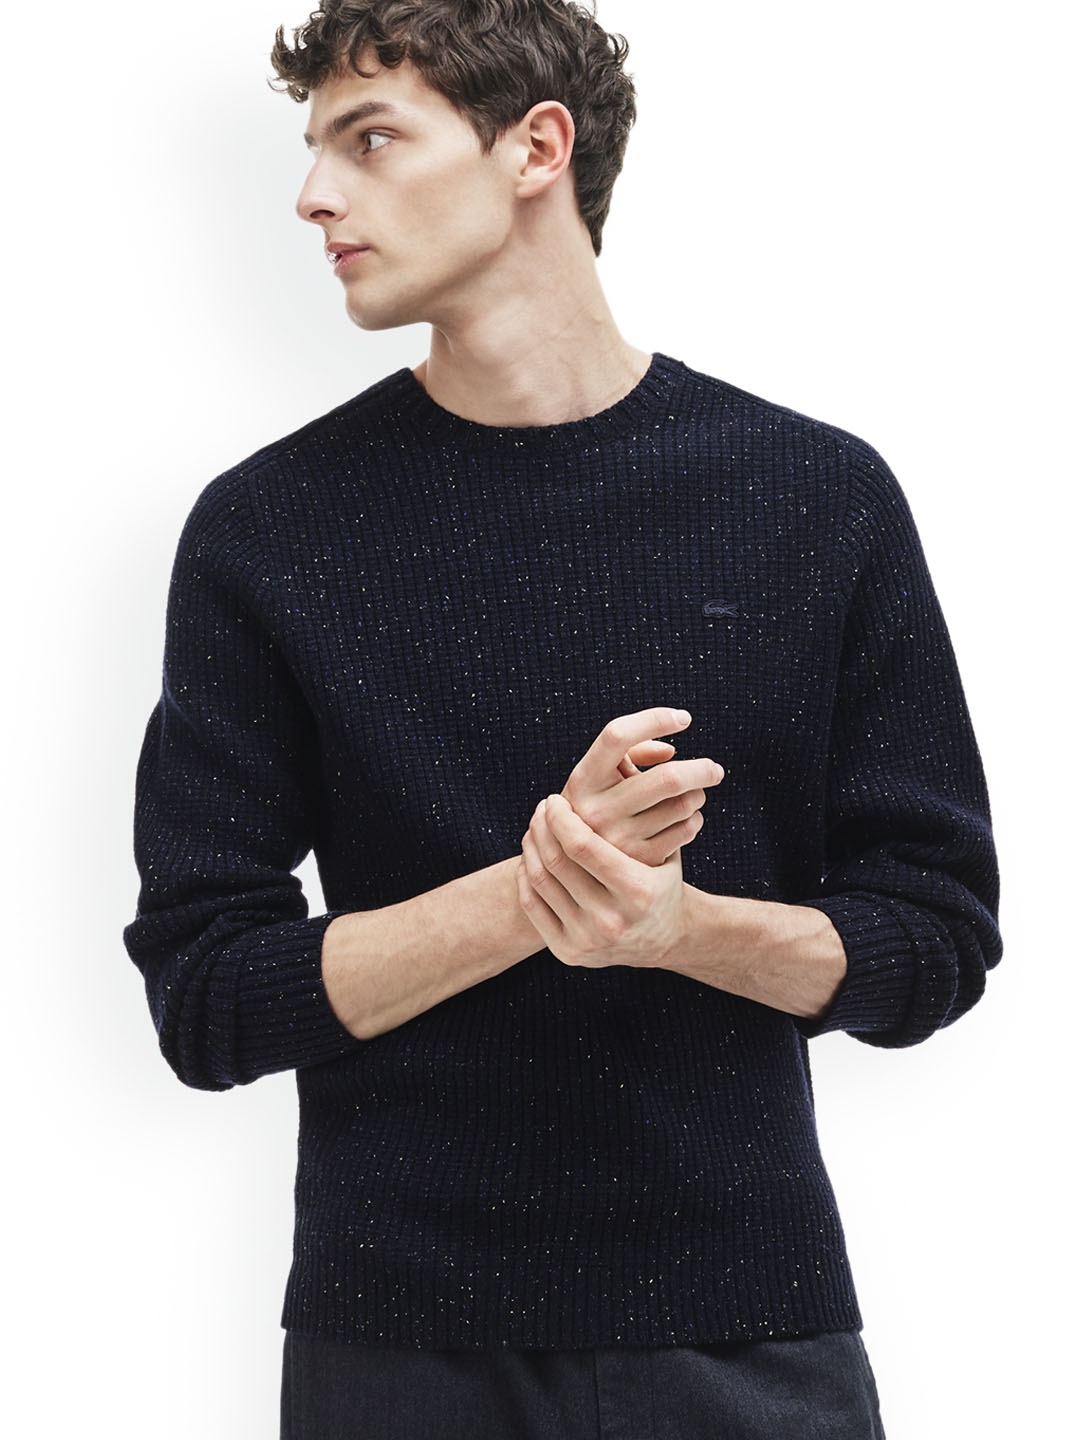 lacoste navy sweater